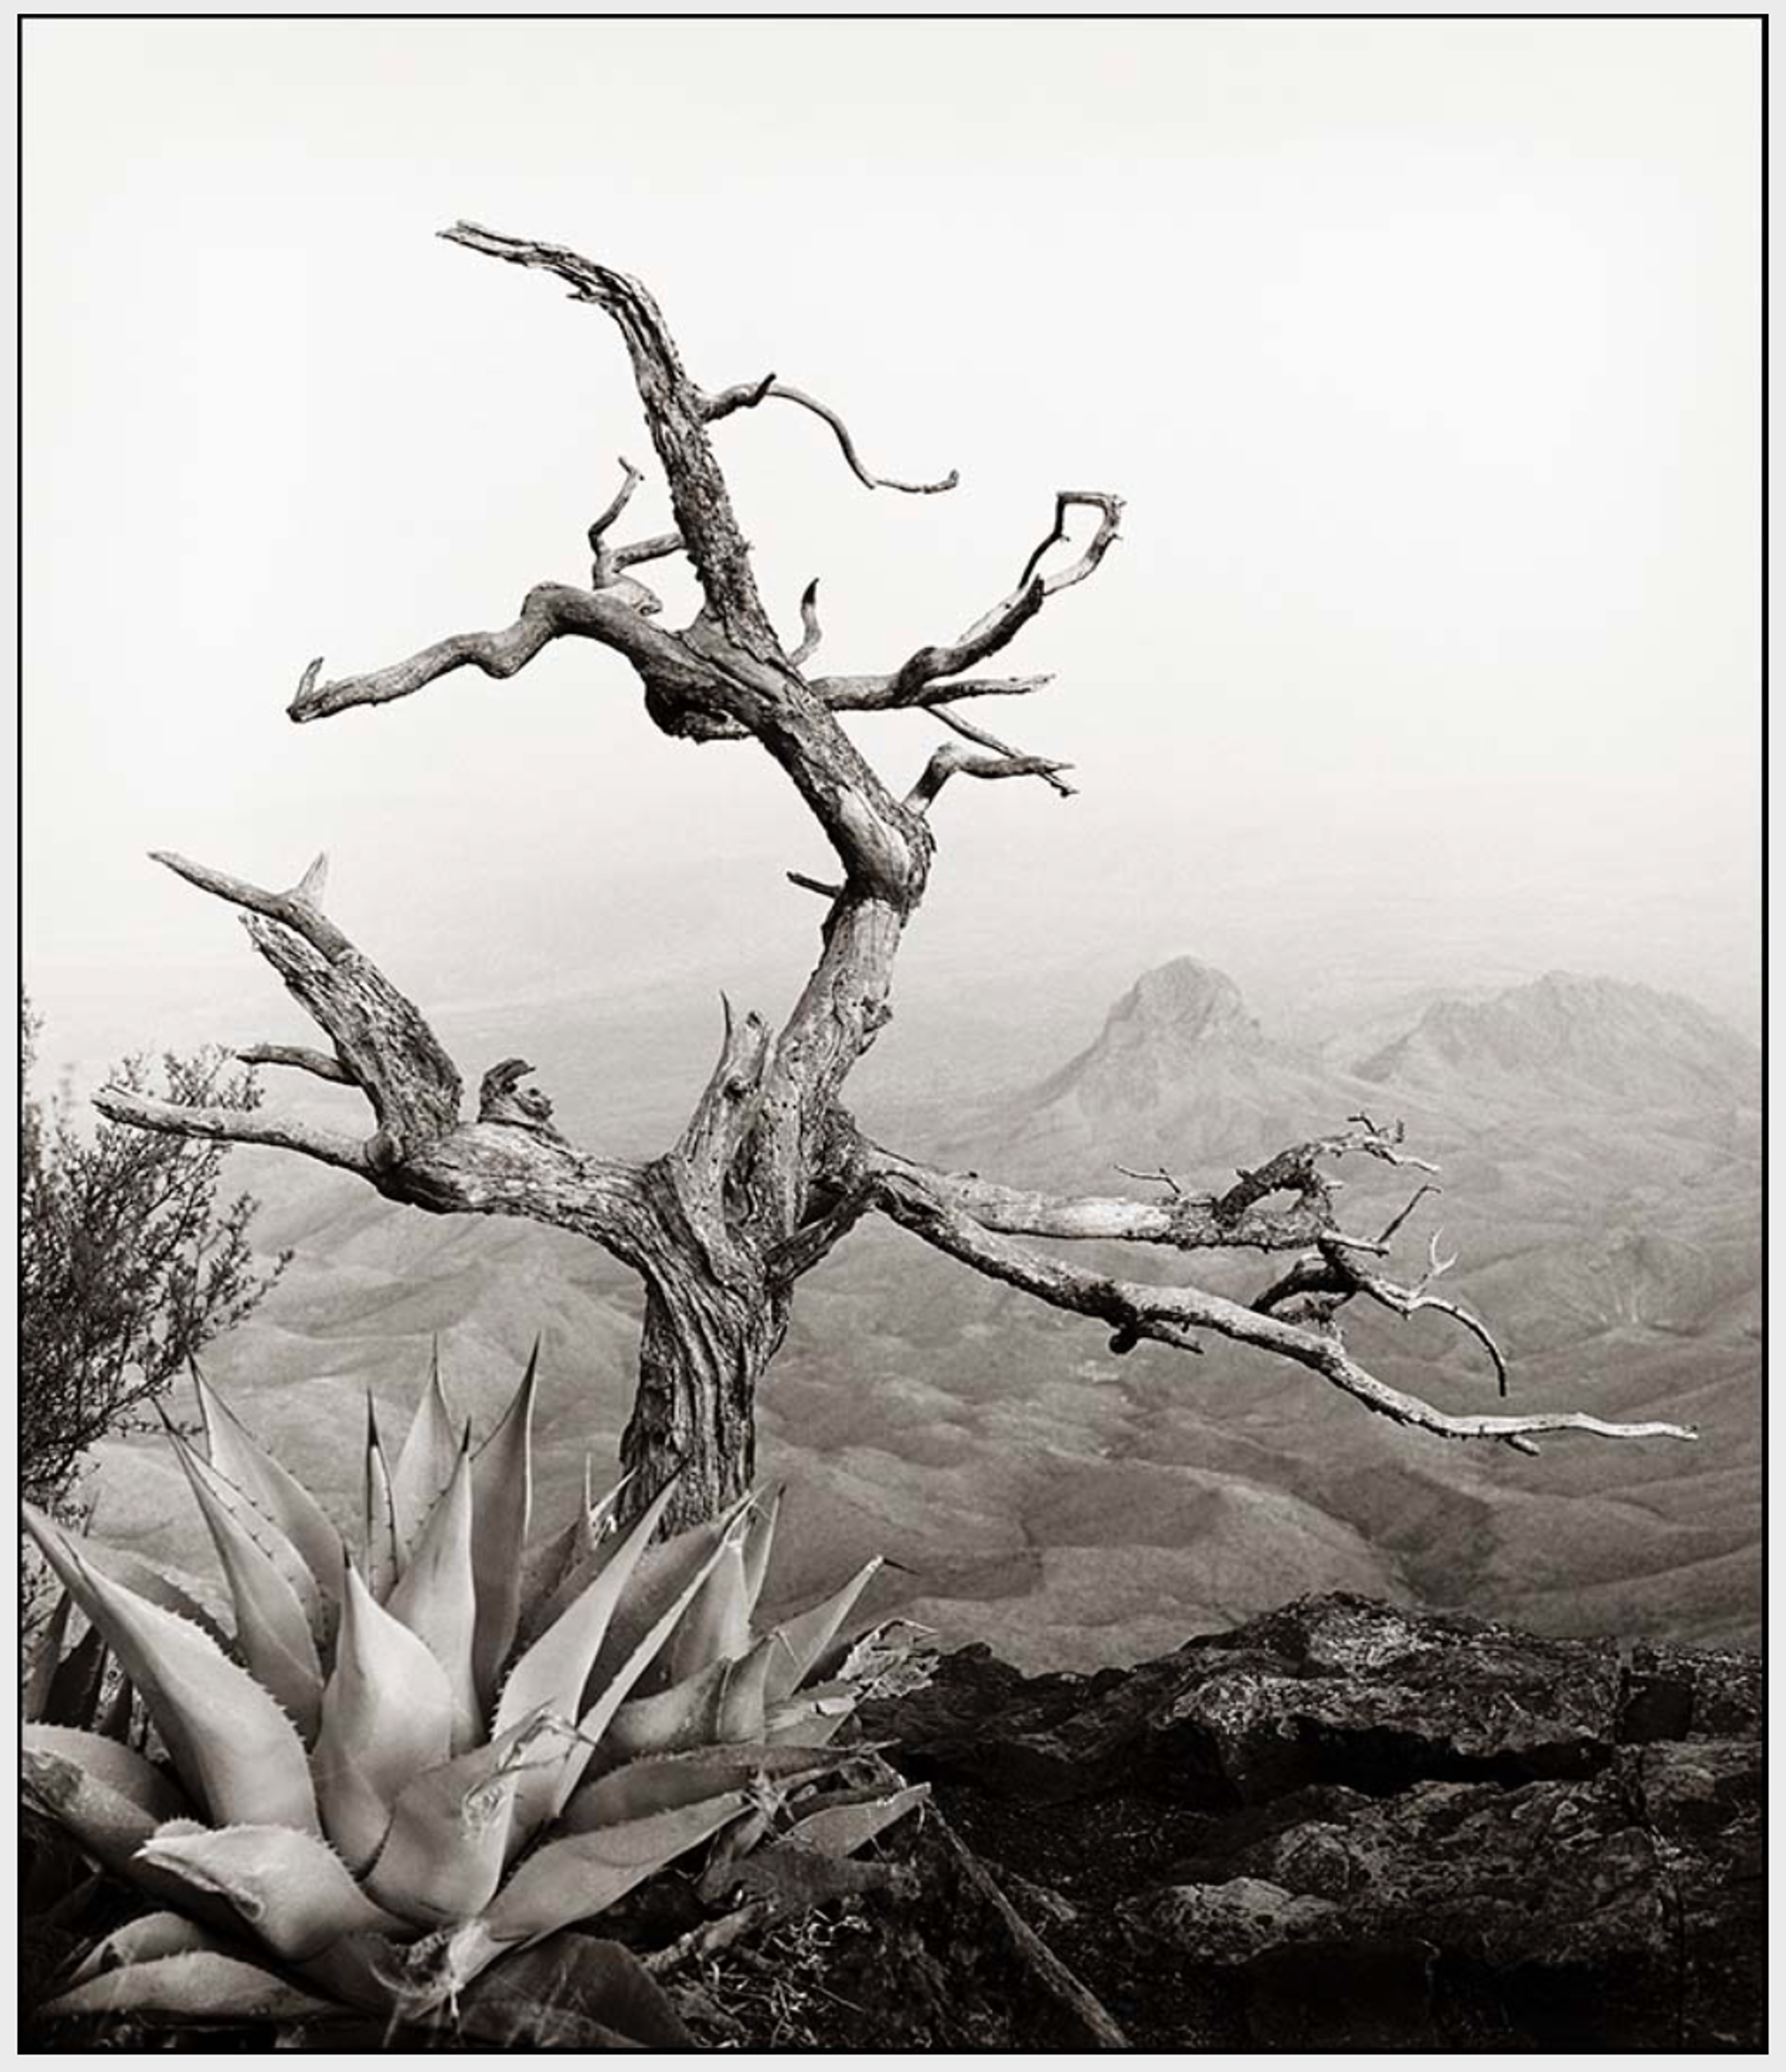 South Rim with Agave by James H. Evans